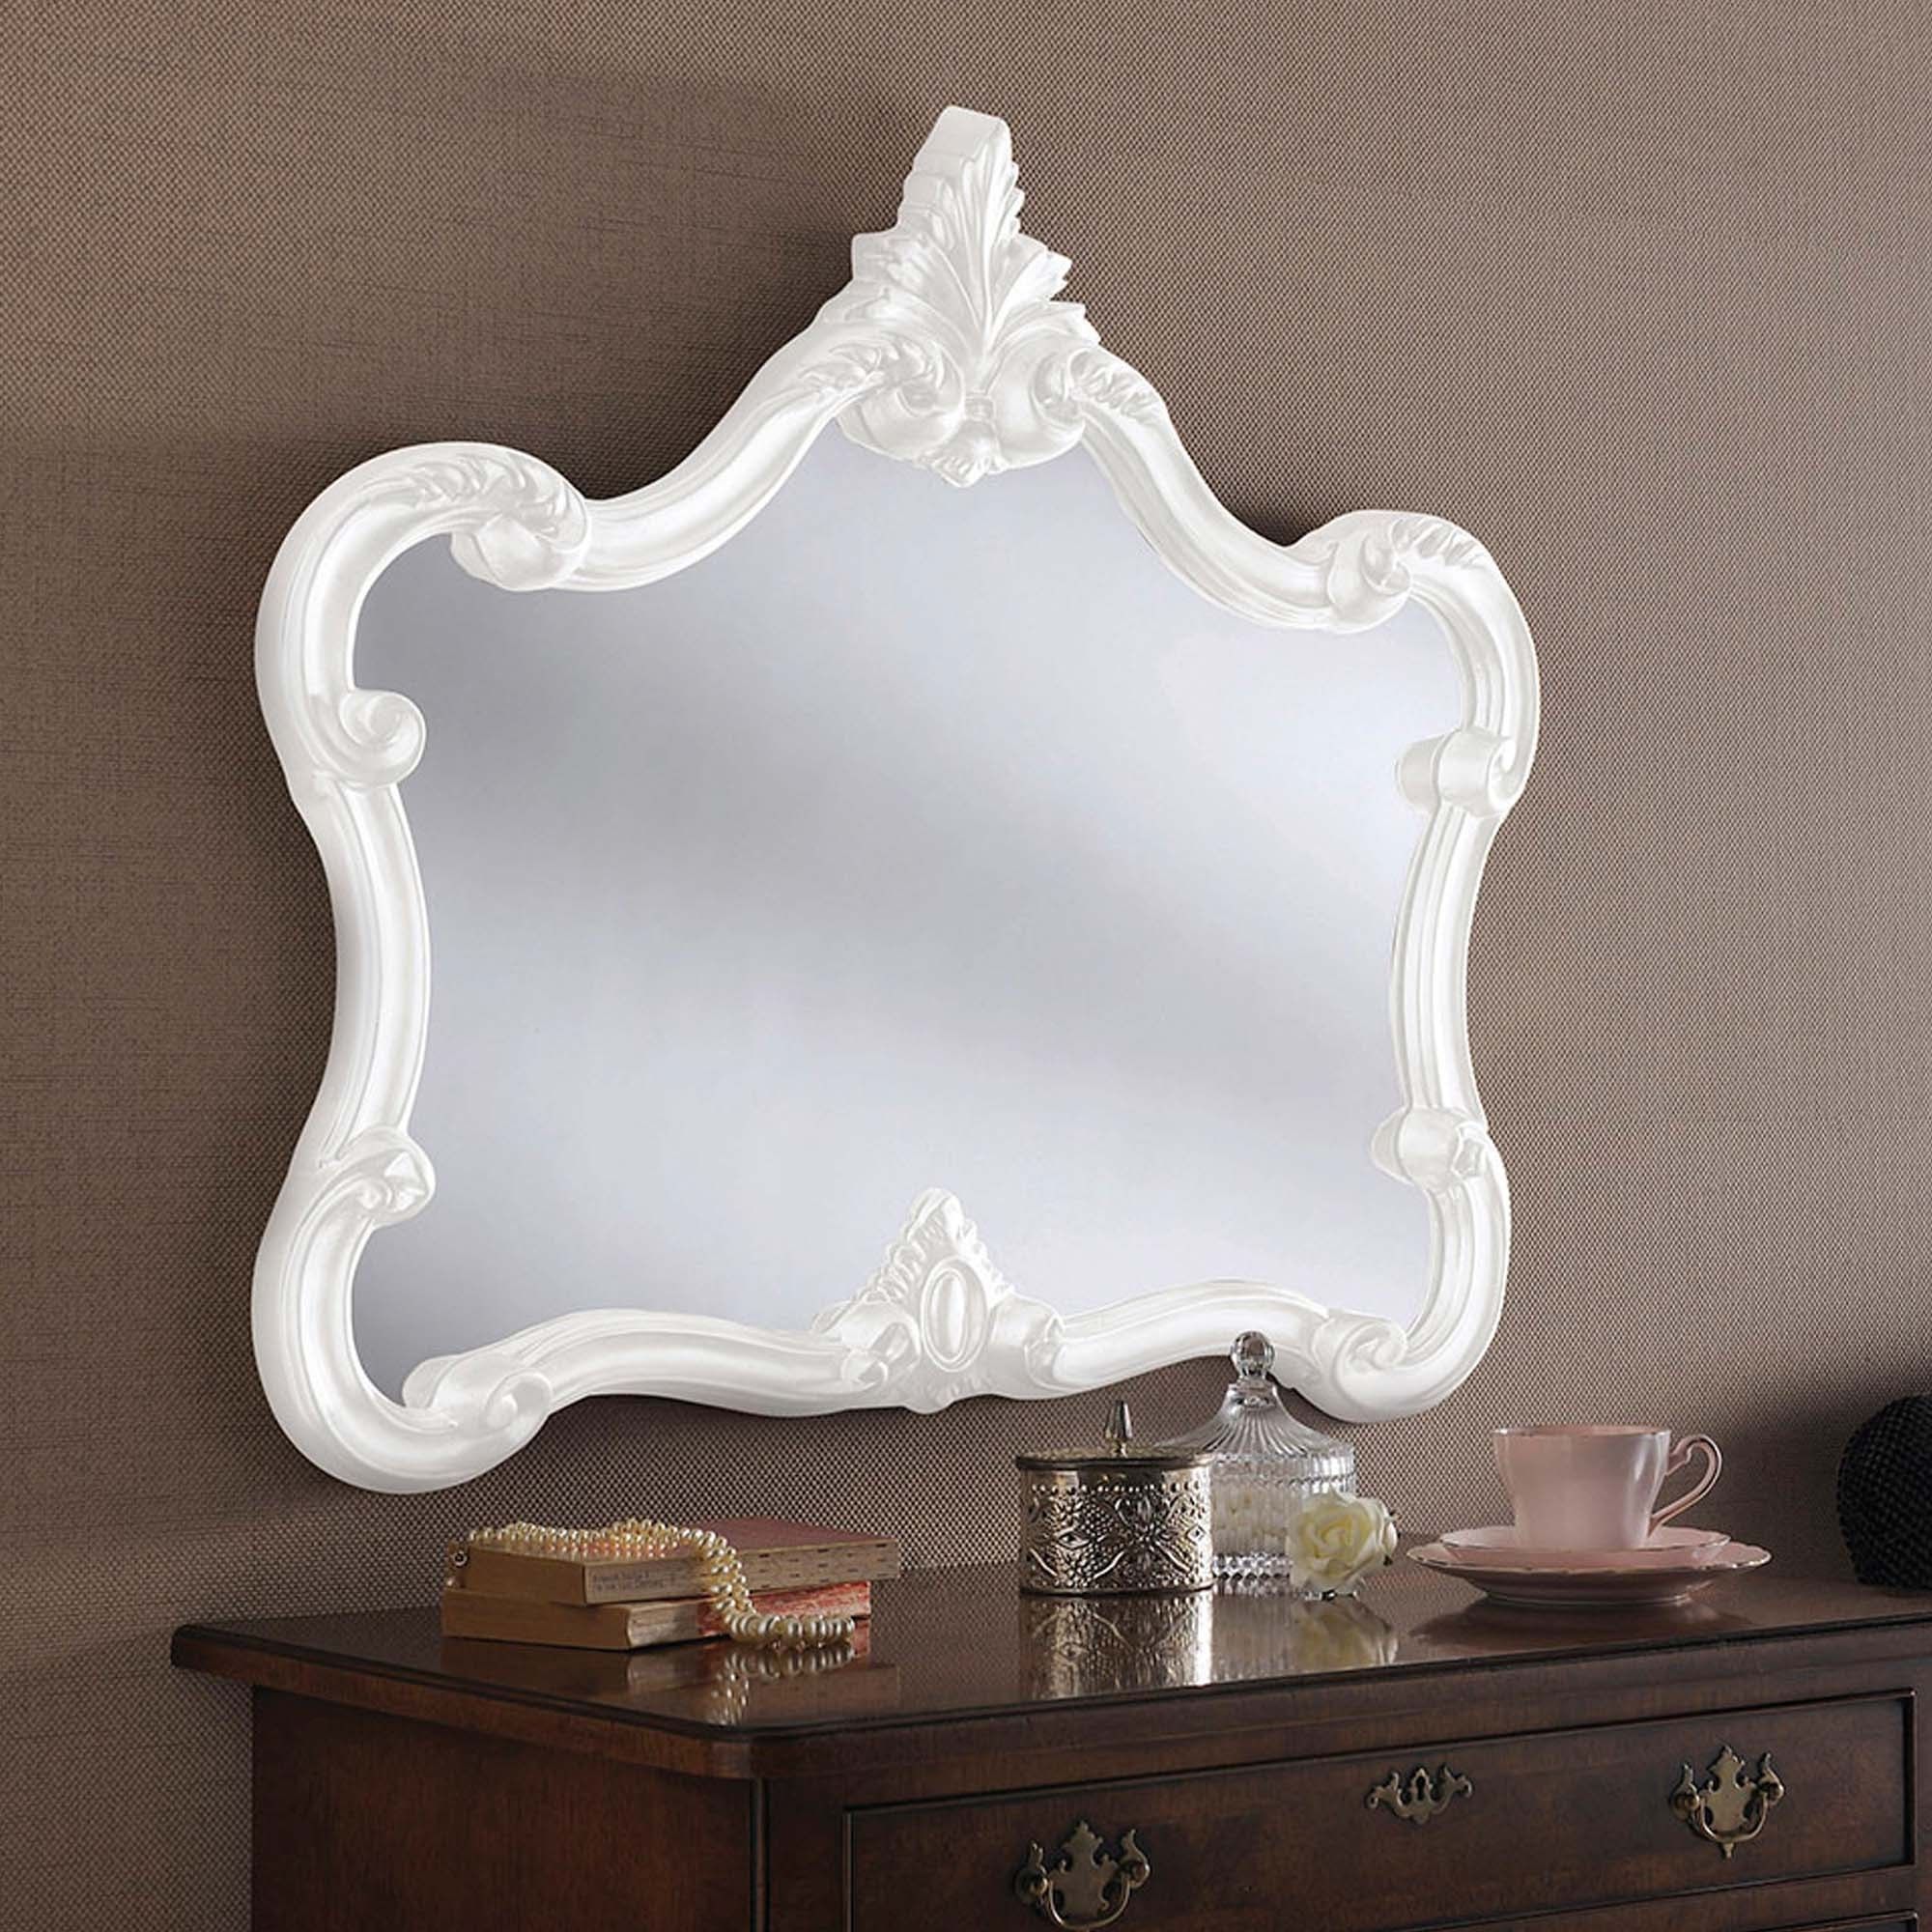 Antique French Style White Ornate Wall Mirror | Wall Mirrors With Regard To Booth Reclaimed Wall Mirrors Accent (View 7 of 15)